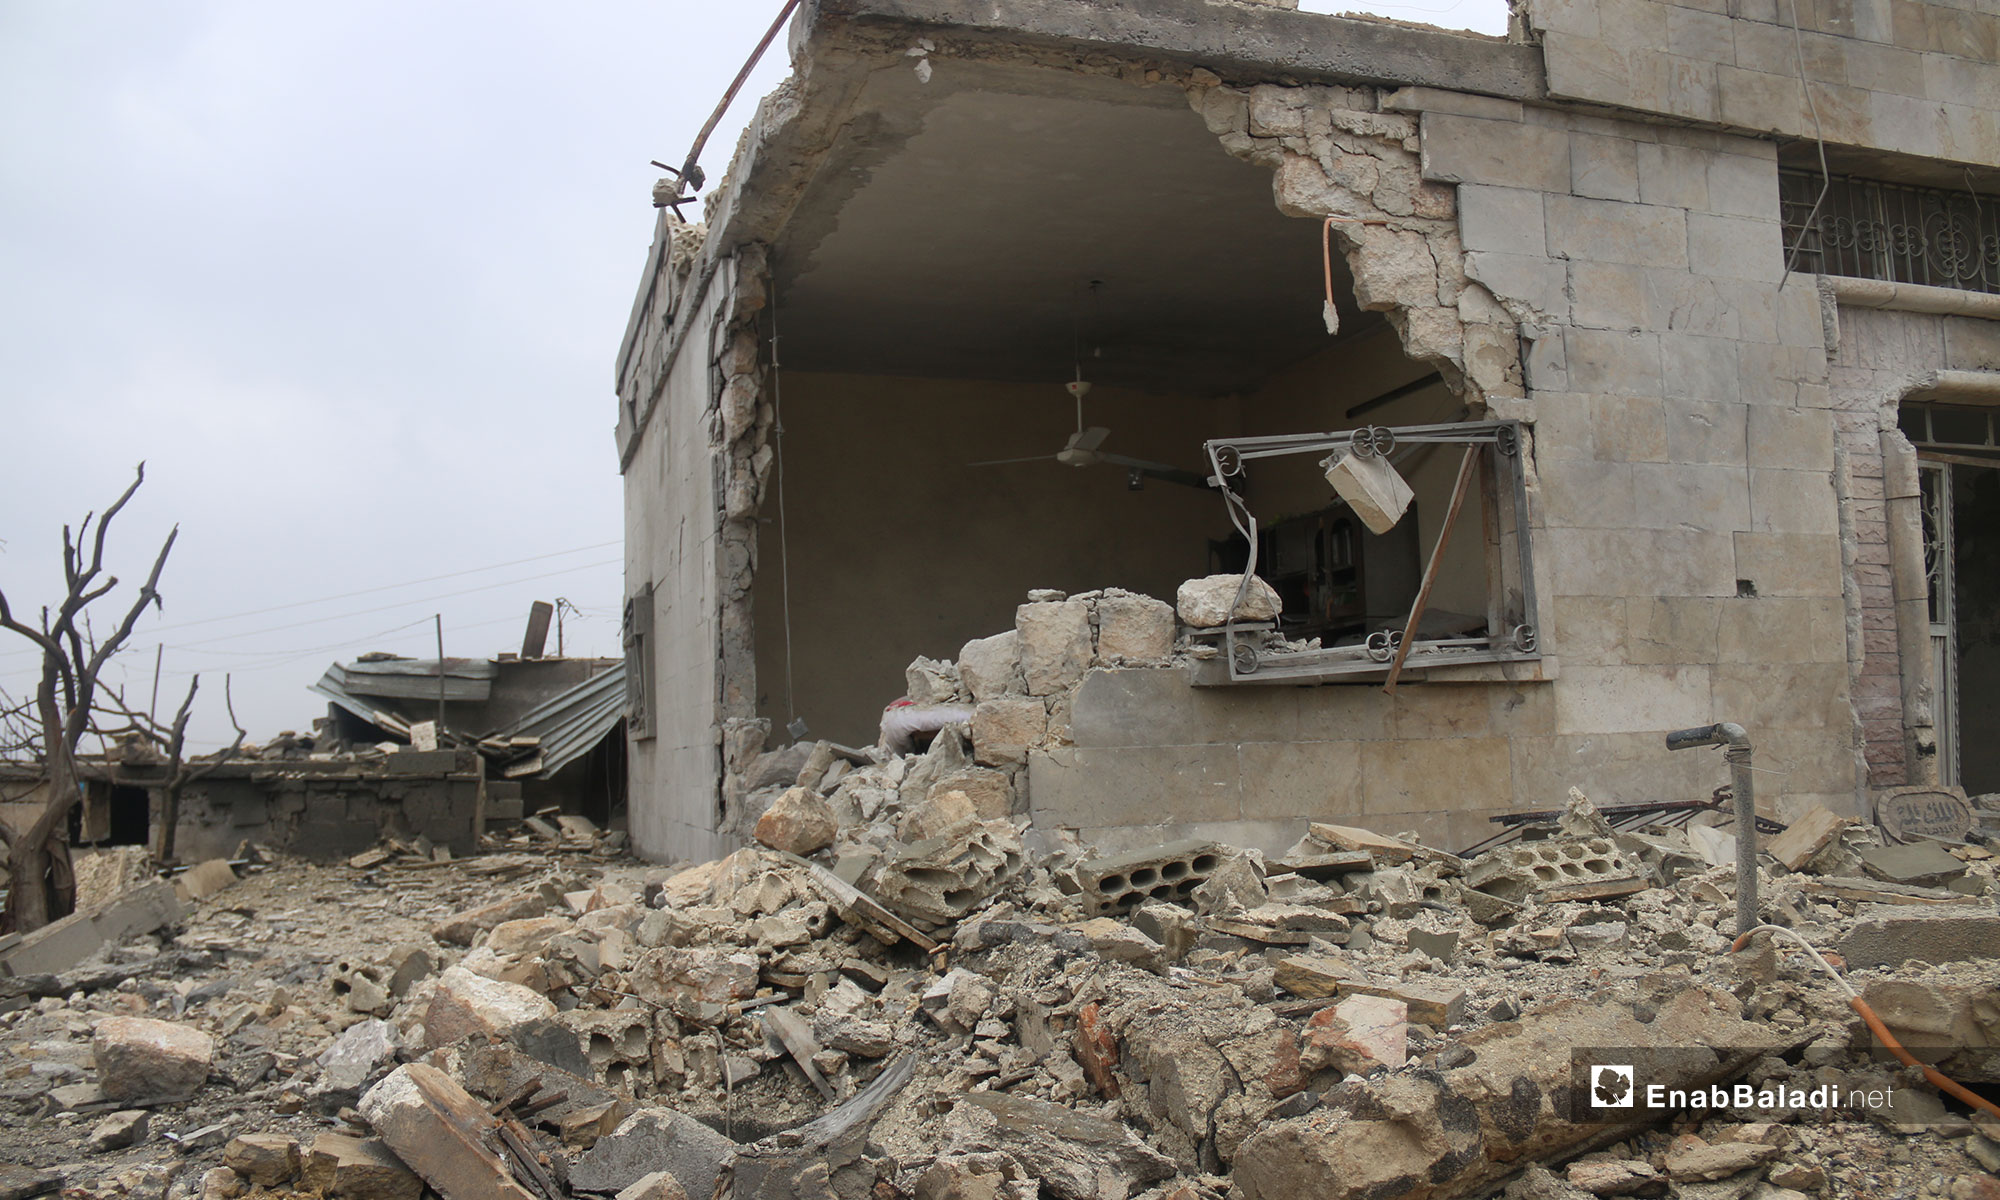 The destruction caused by the shelling of the town of Jarjnaz, southern Idilb – February 7, 2019 (Enab Baladi)